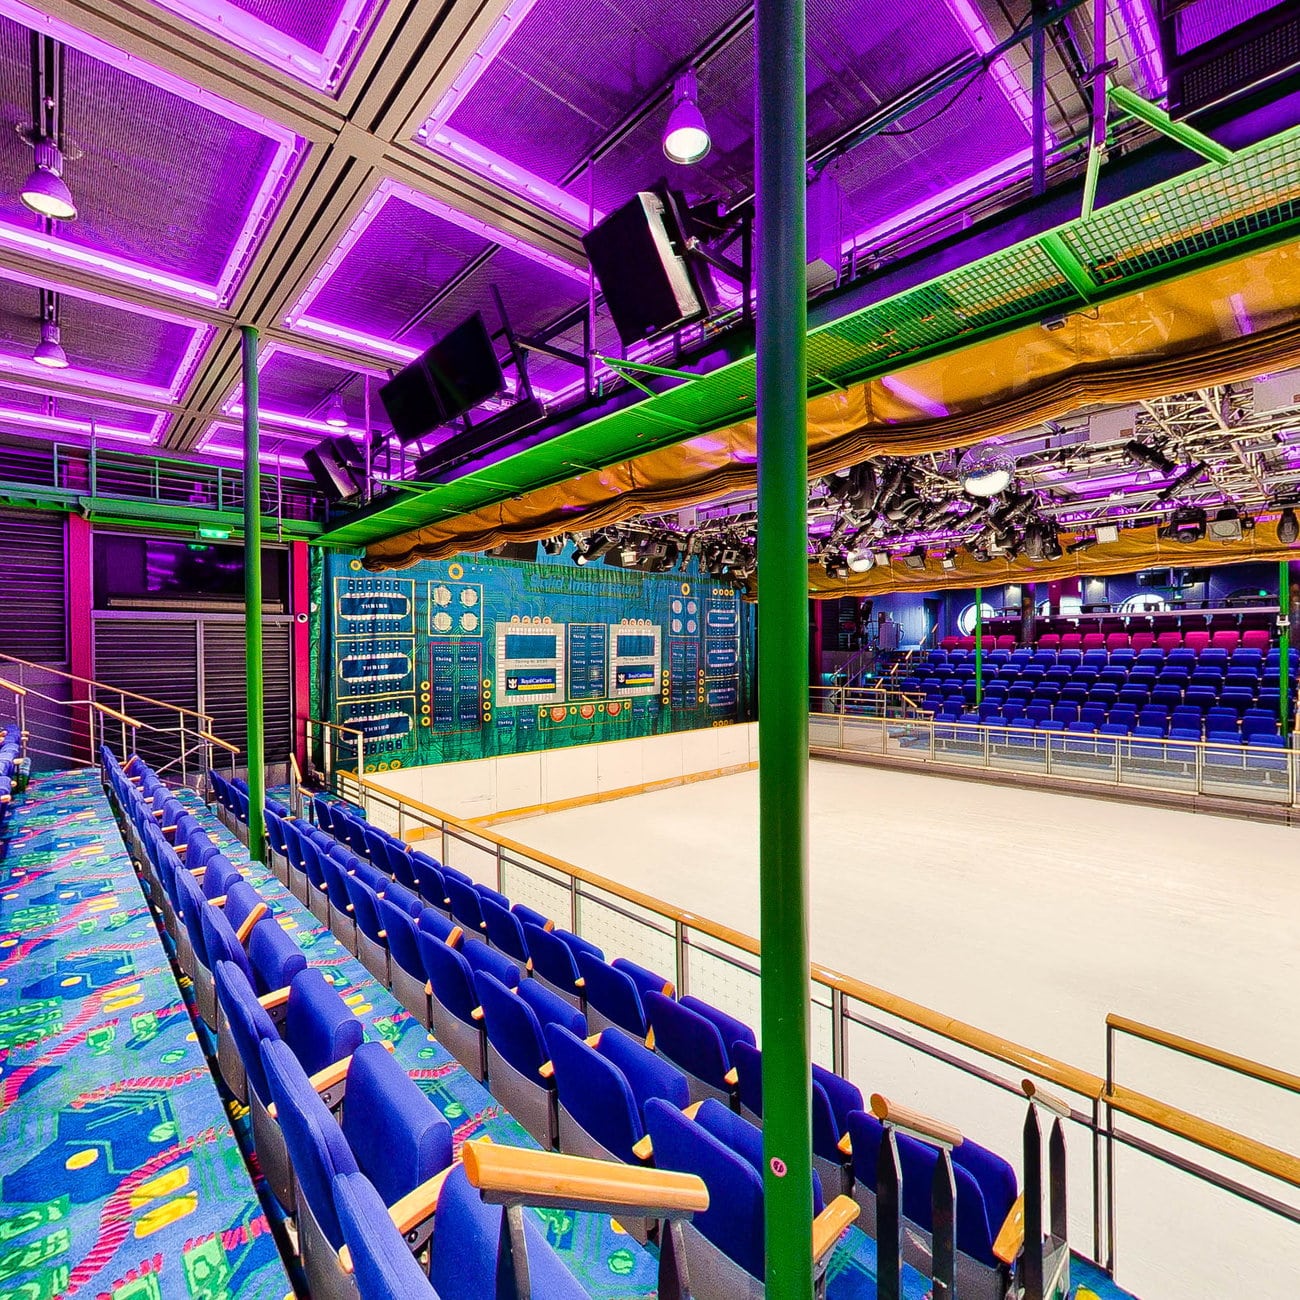 Center Ice Rink on Royal Caribbean Explorer of the Seas